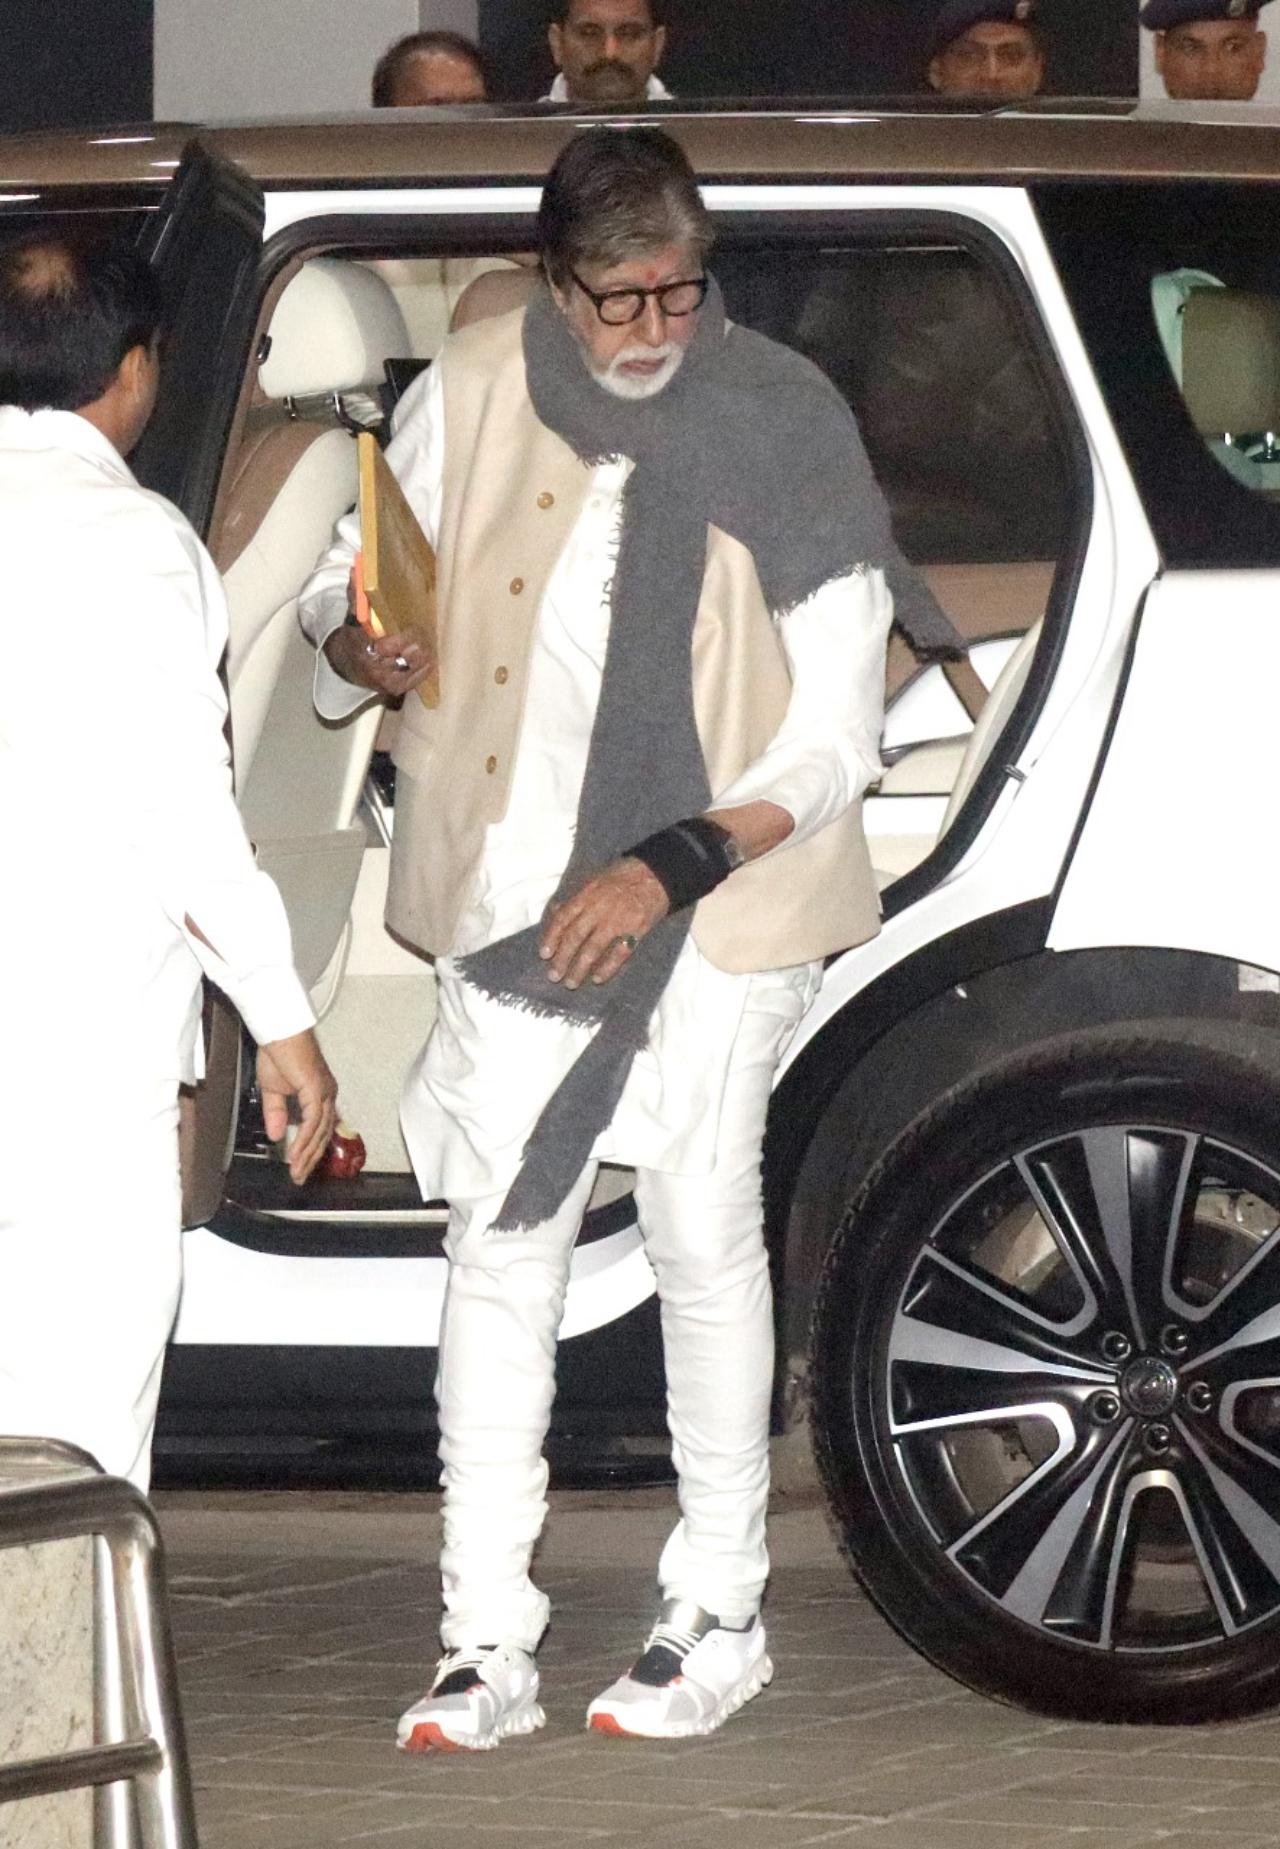 Megastar Amitabh Bachchan also arrived at the airport on Monday. He was seen in a kurta pajama. The actor has also bought a piece of land in Ayodhya, close to the temple